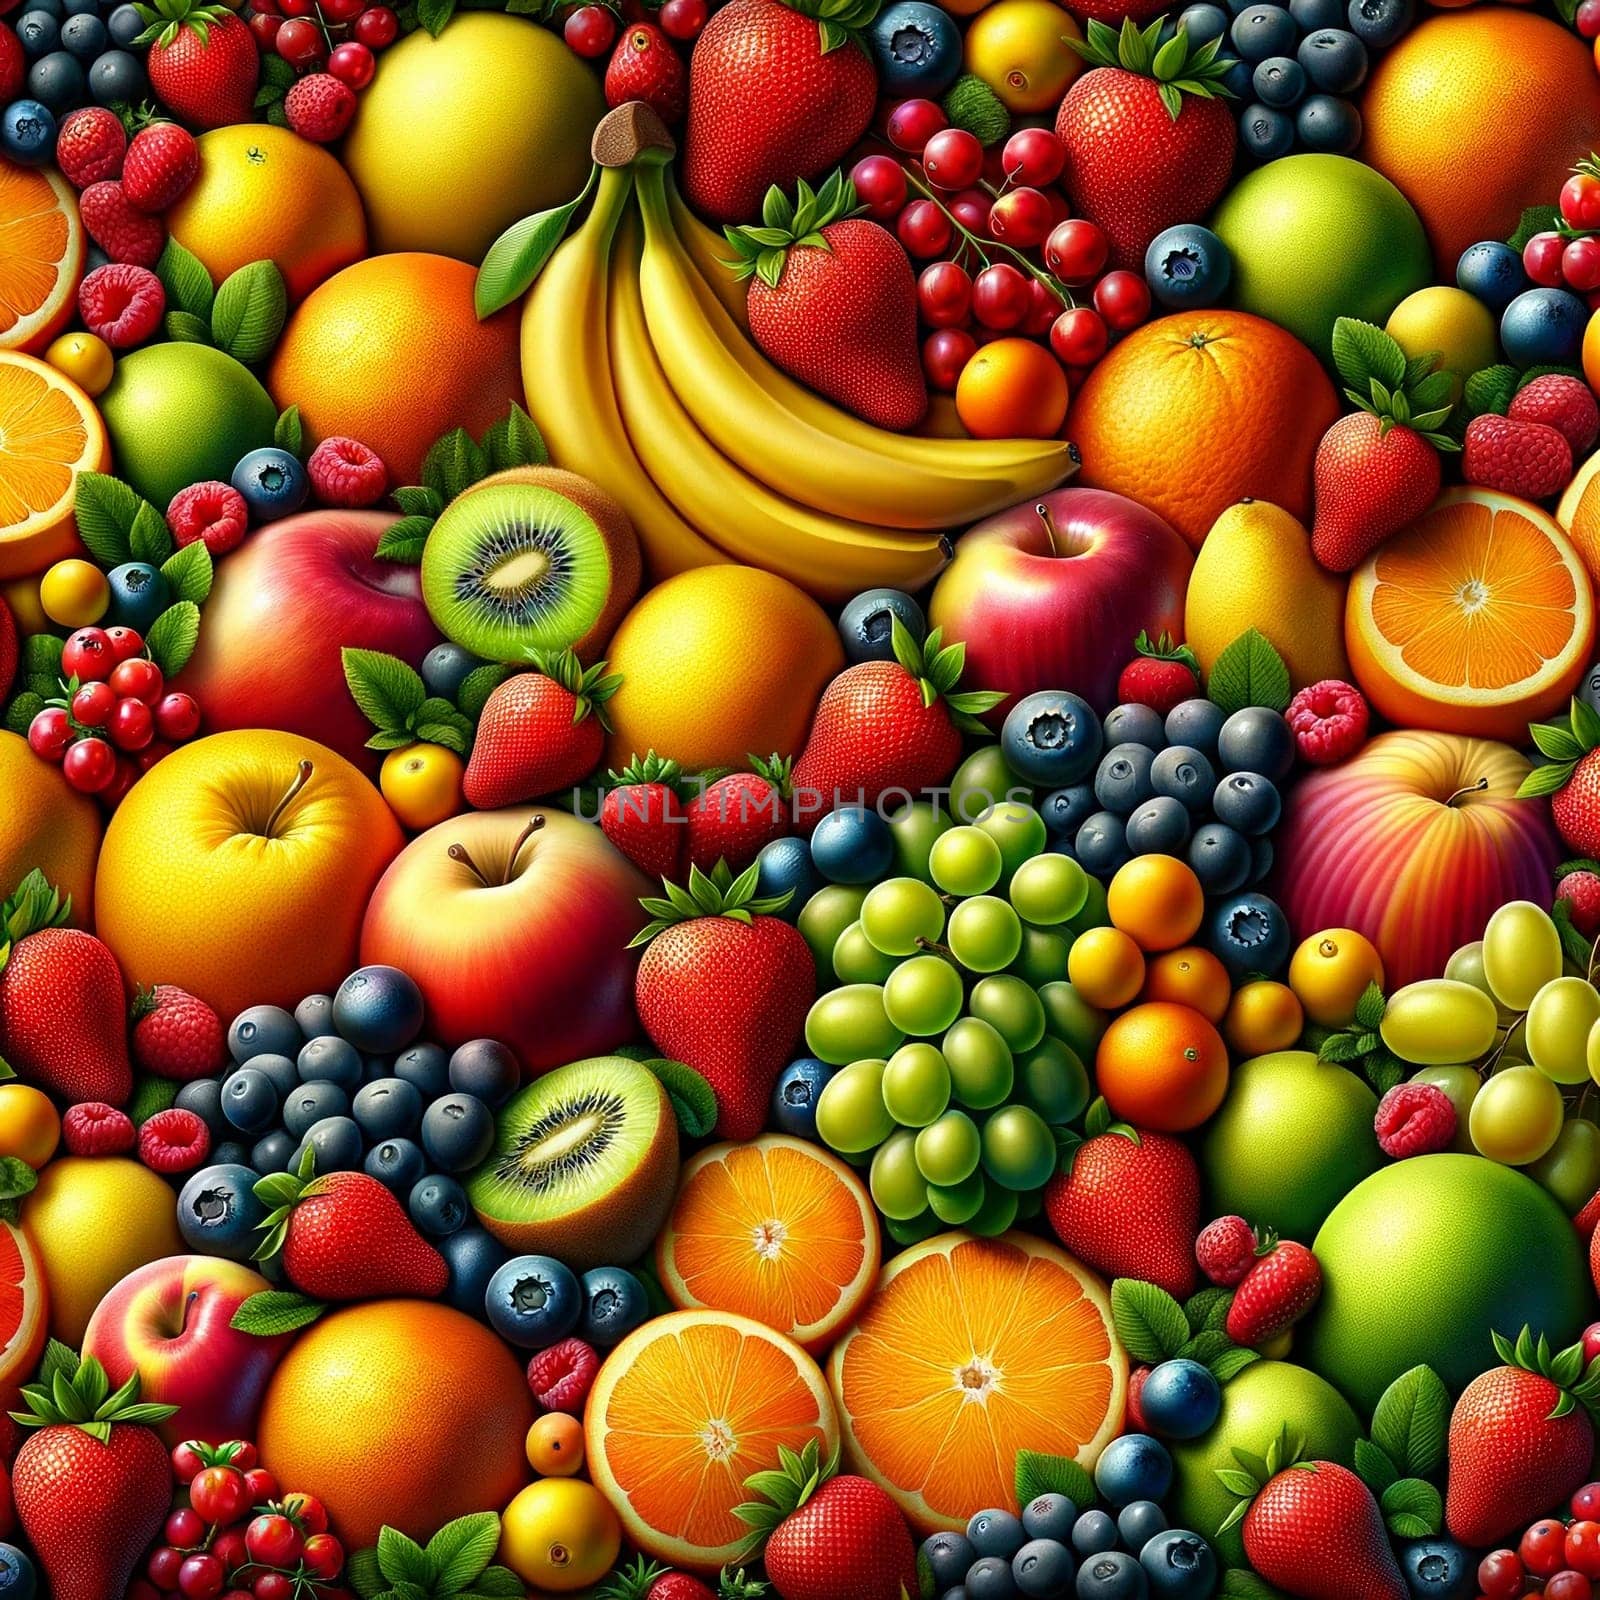 A vibrant painting showcasing a variety of fruits including red strawberries, green apples, yellow bananas, and orange oranges arranged in a colorful background.